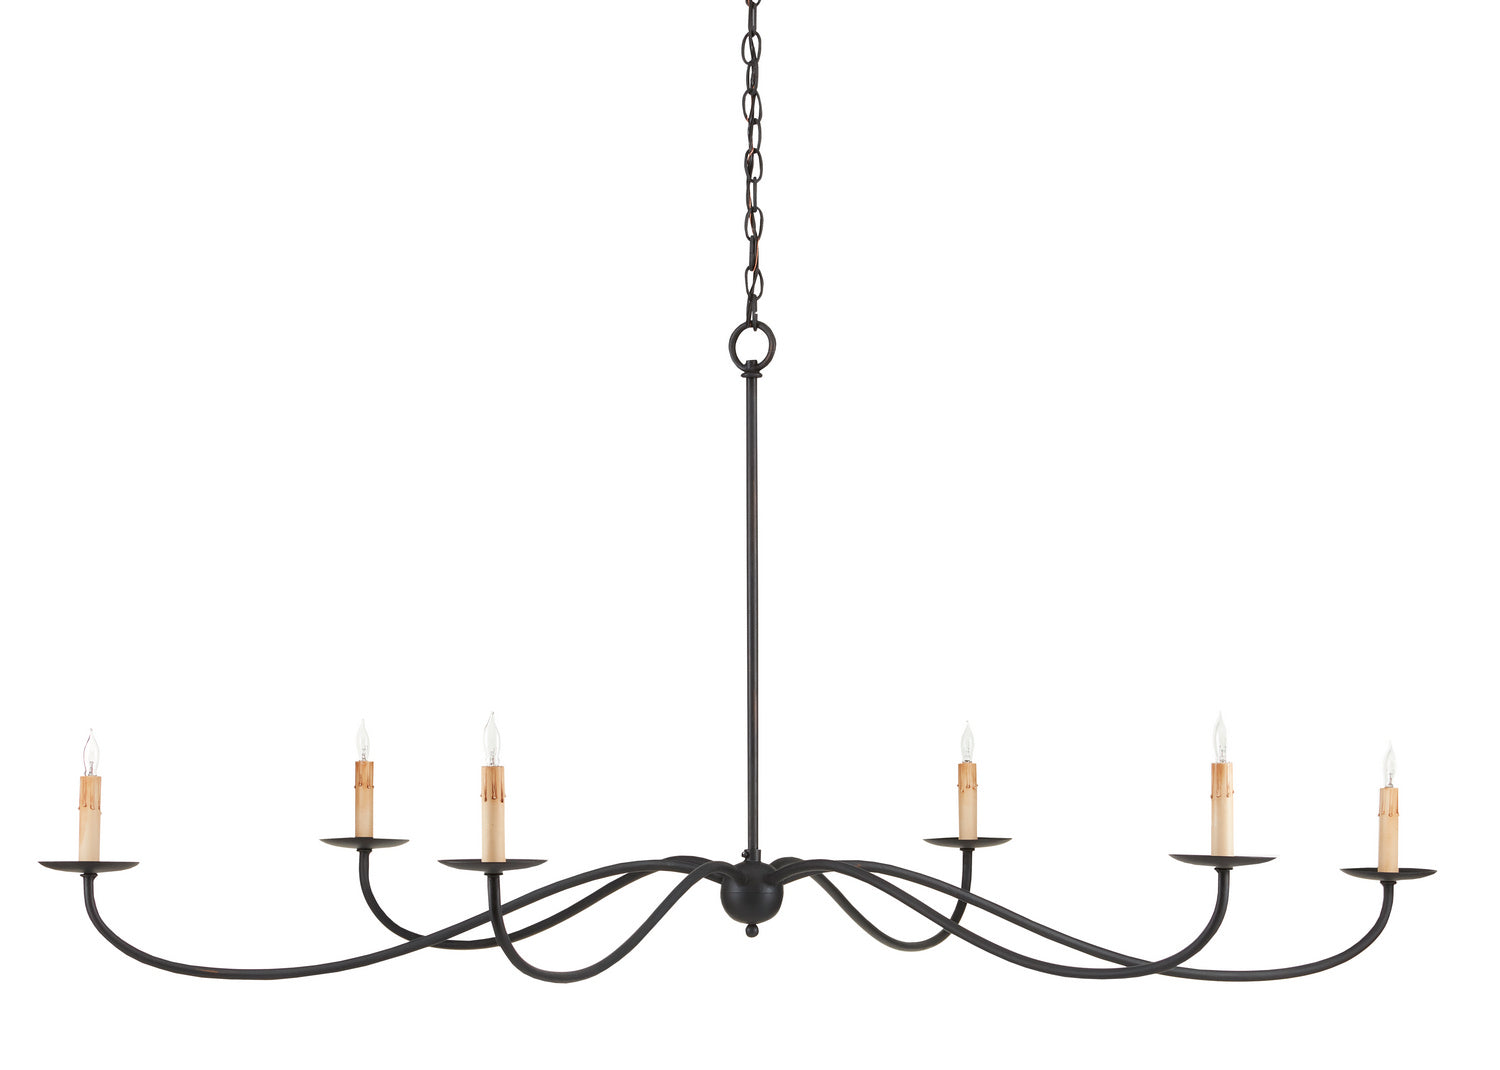 Six Light Chandelier from the Saxon collection in Zanzibar Black finish